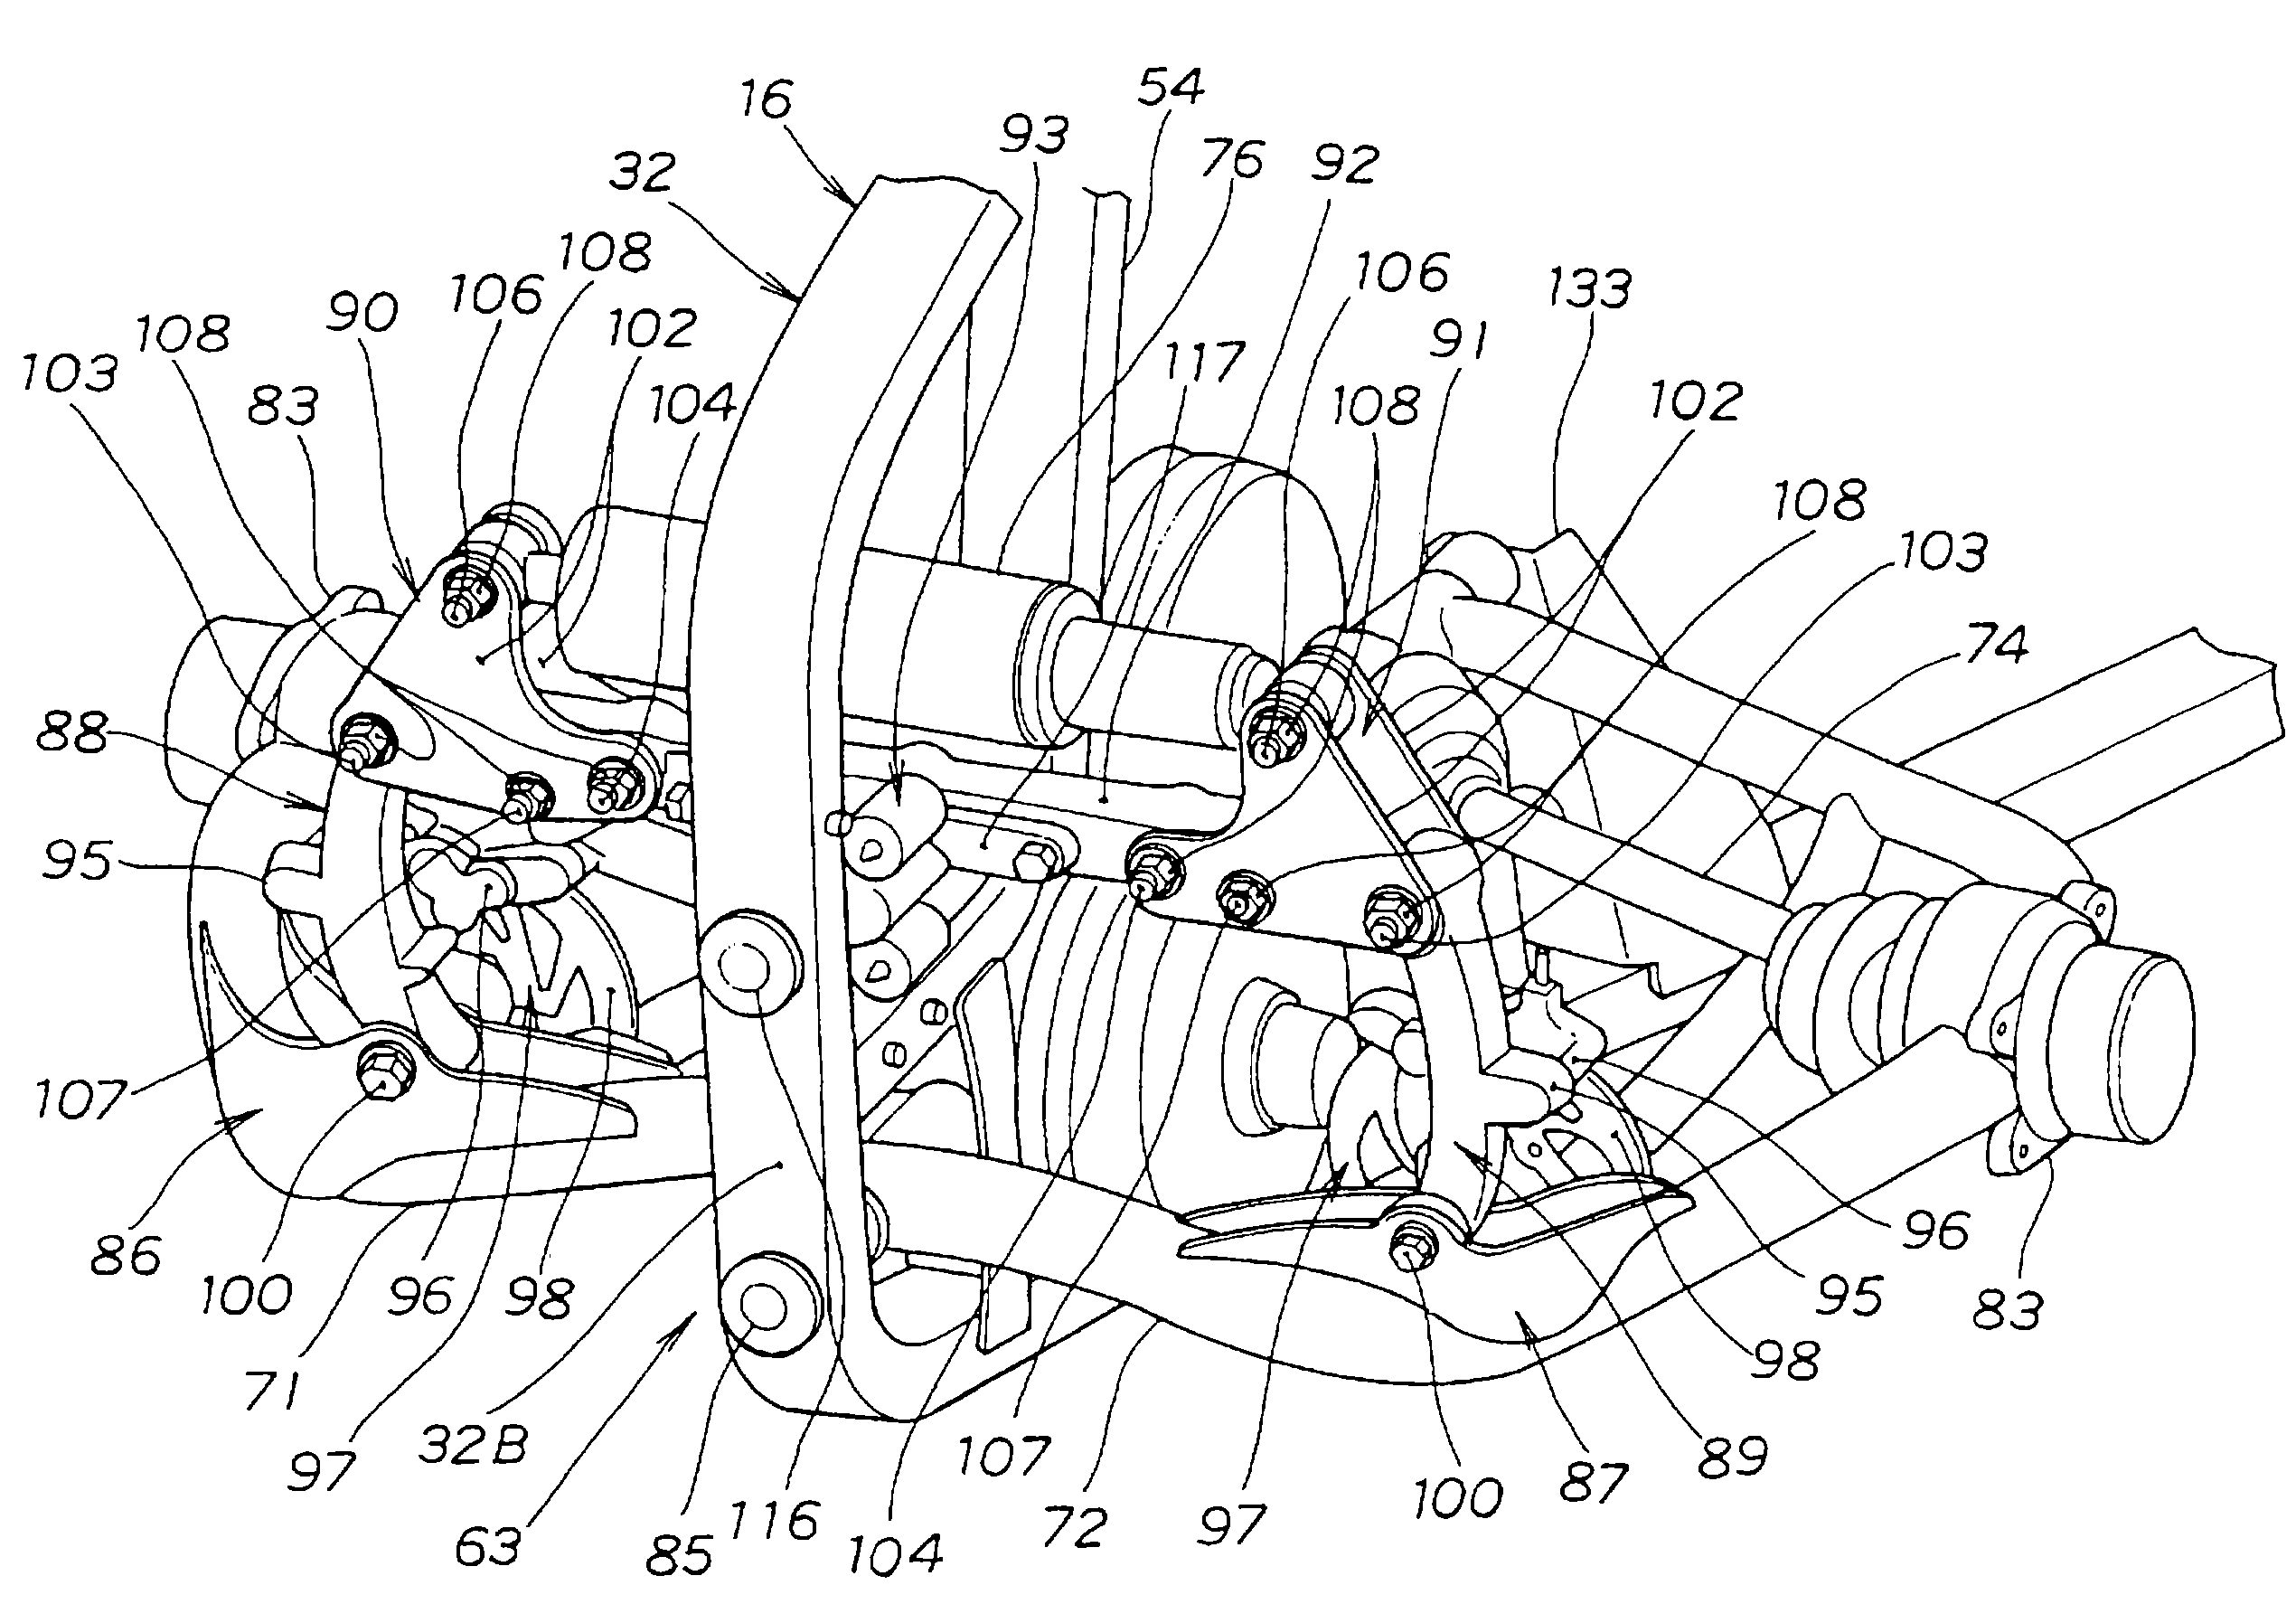 Motortricycle with oscillation mechanism